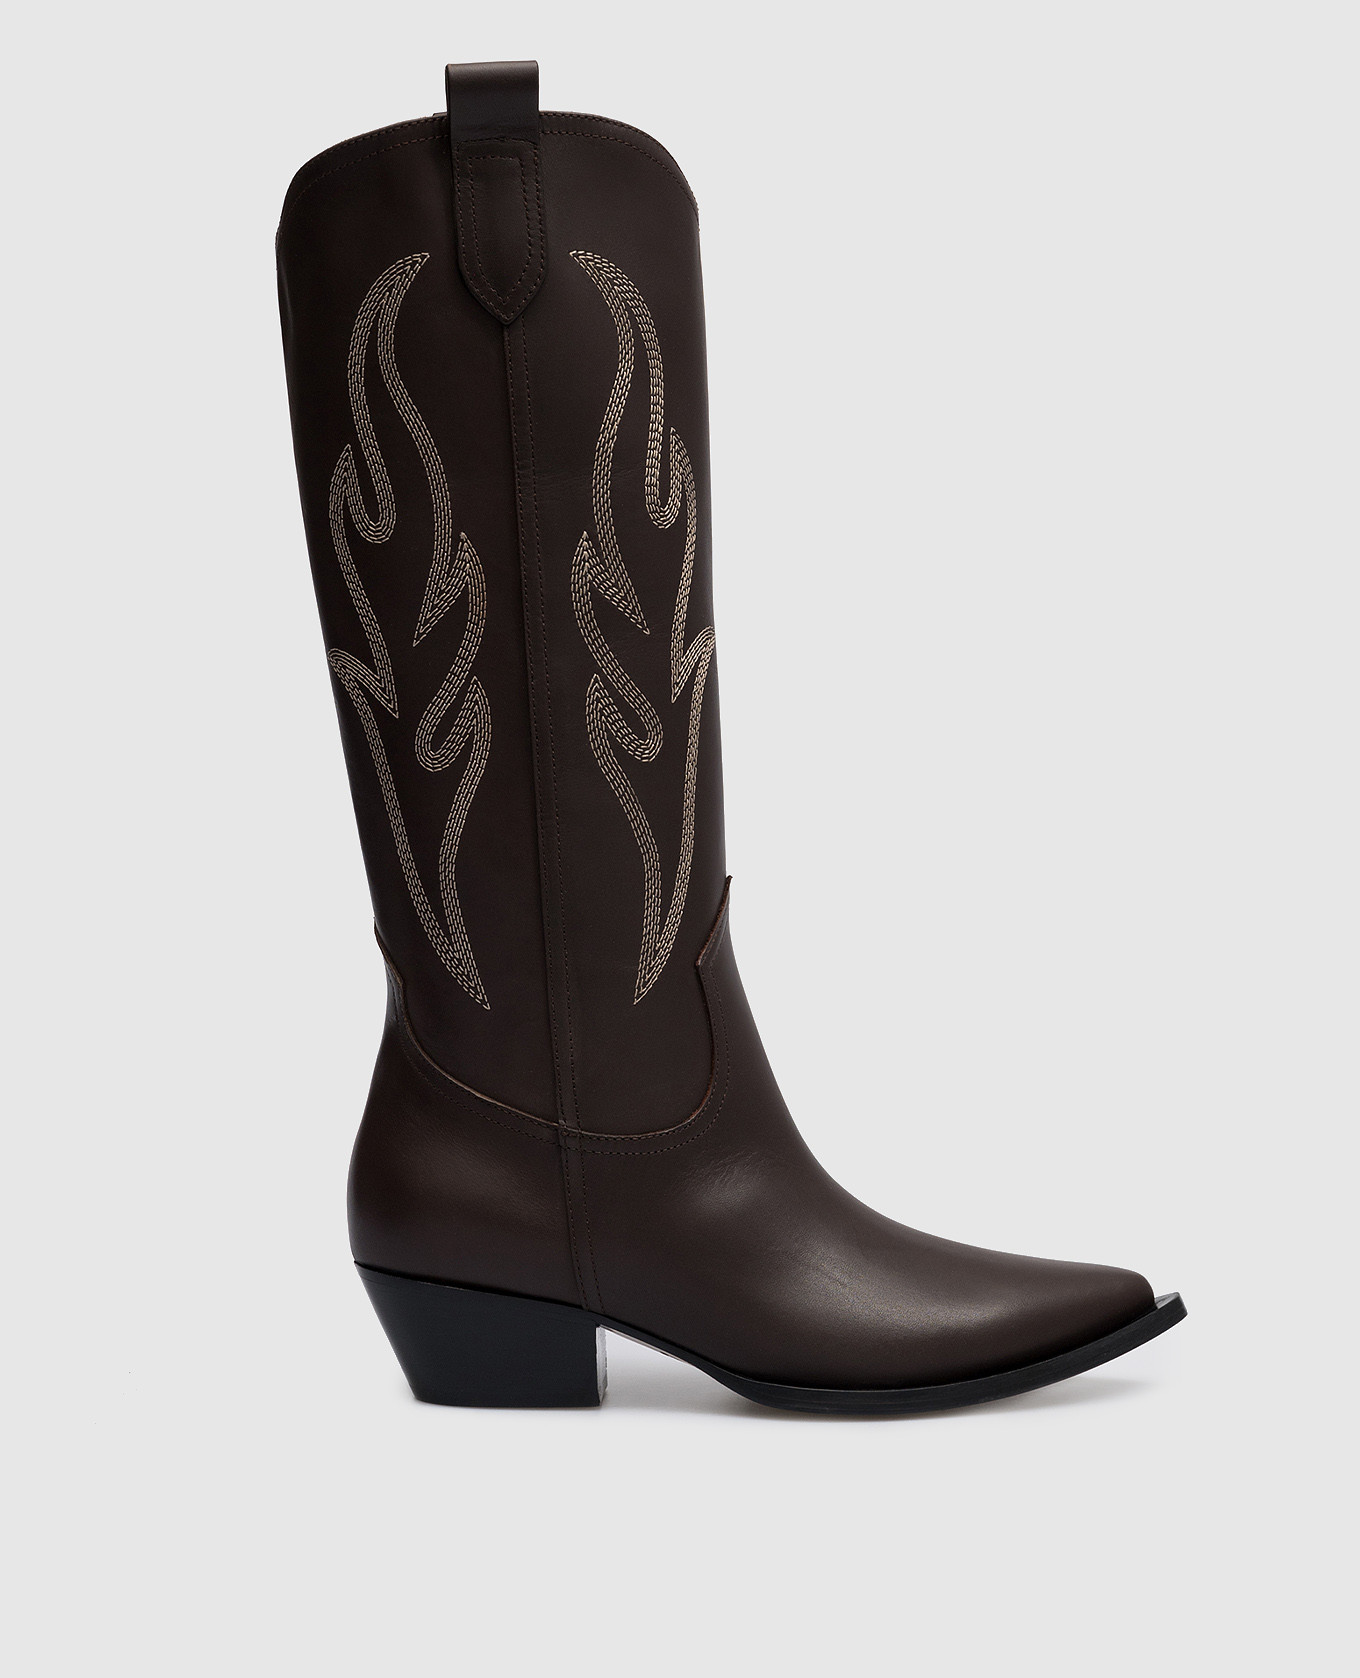 Brown leather Dallas boots with embroidery